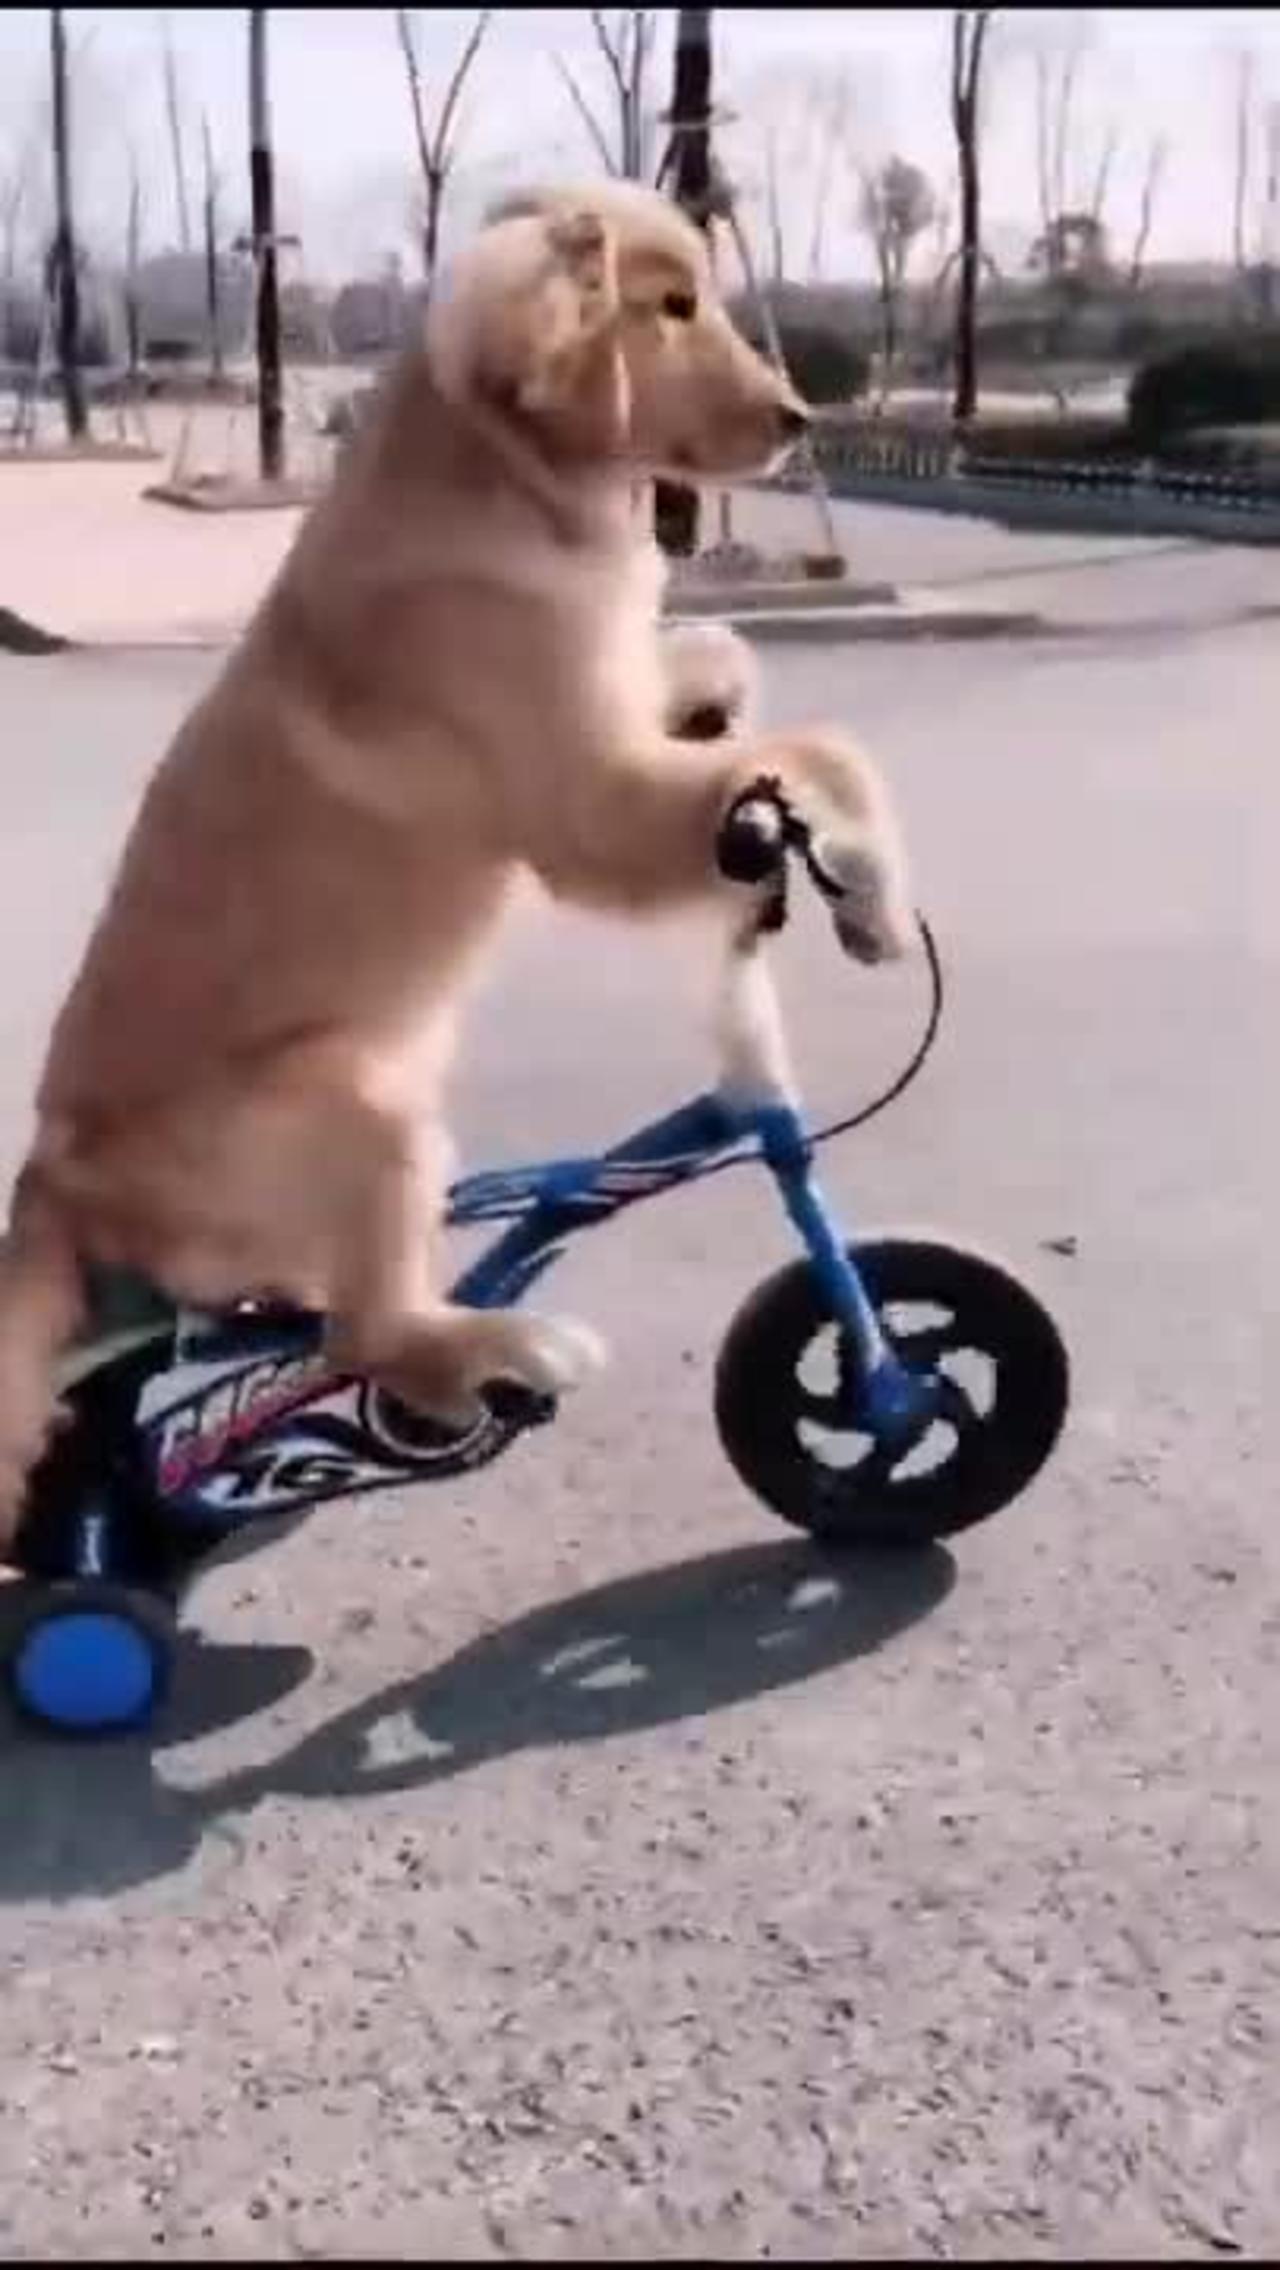 Cute dog riding a bicycle - Best Animal Reaction and Moments